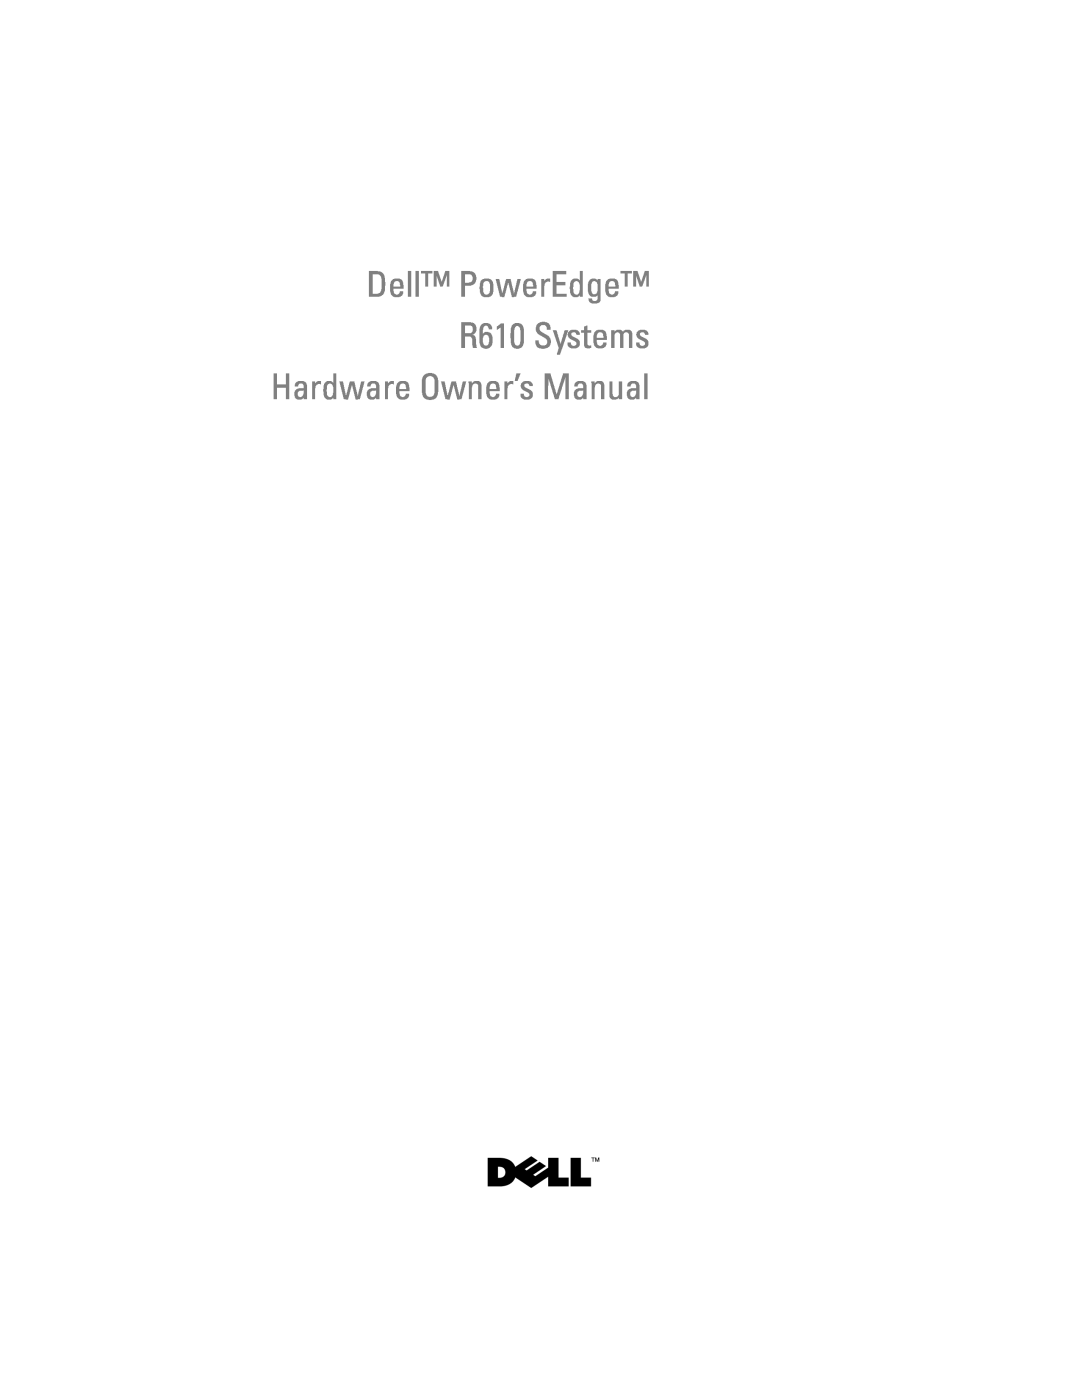 Dell owner manual Dell PowerEdge R610 Systems Hardware Owner’s Manual 